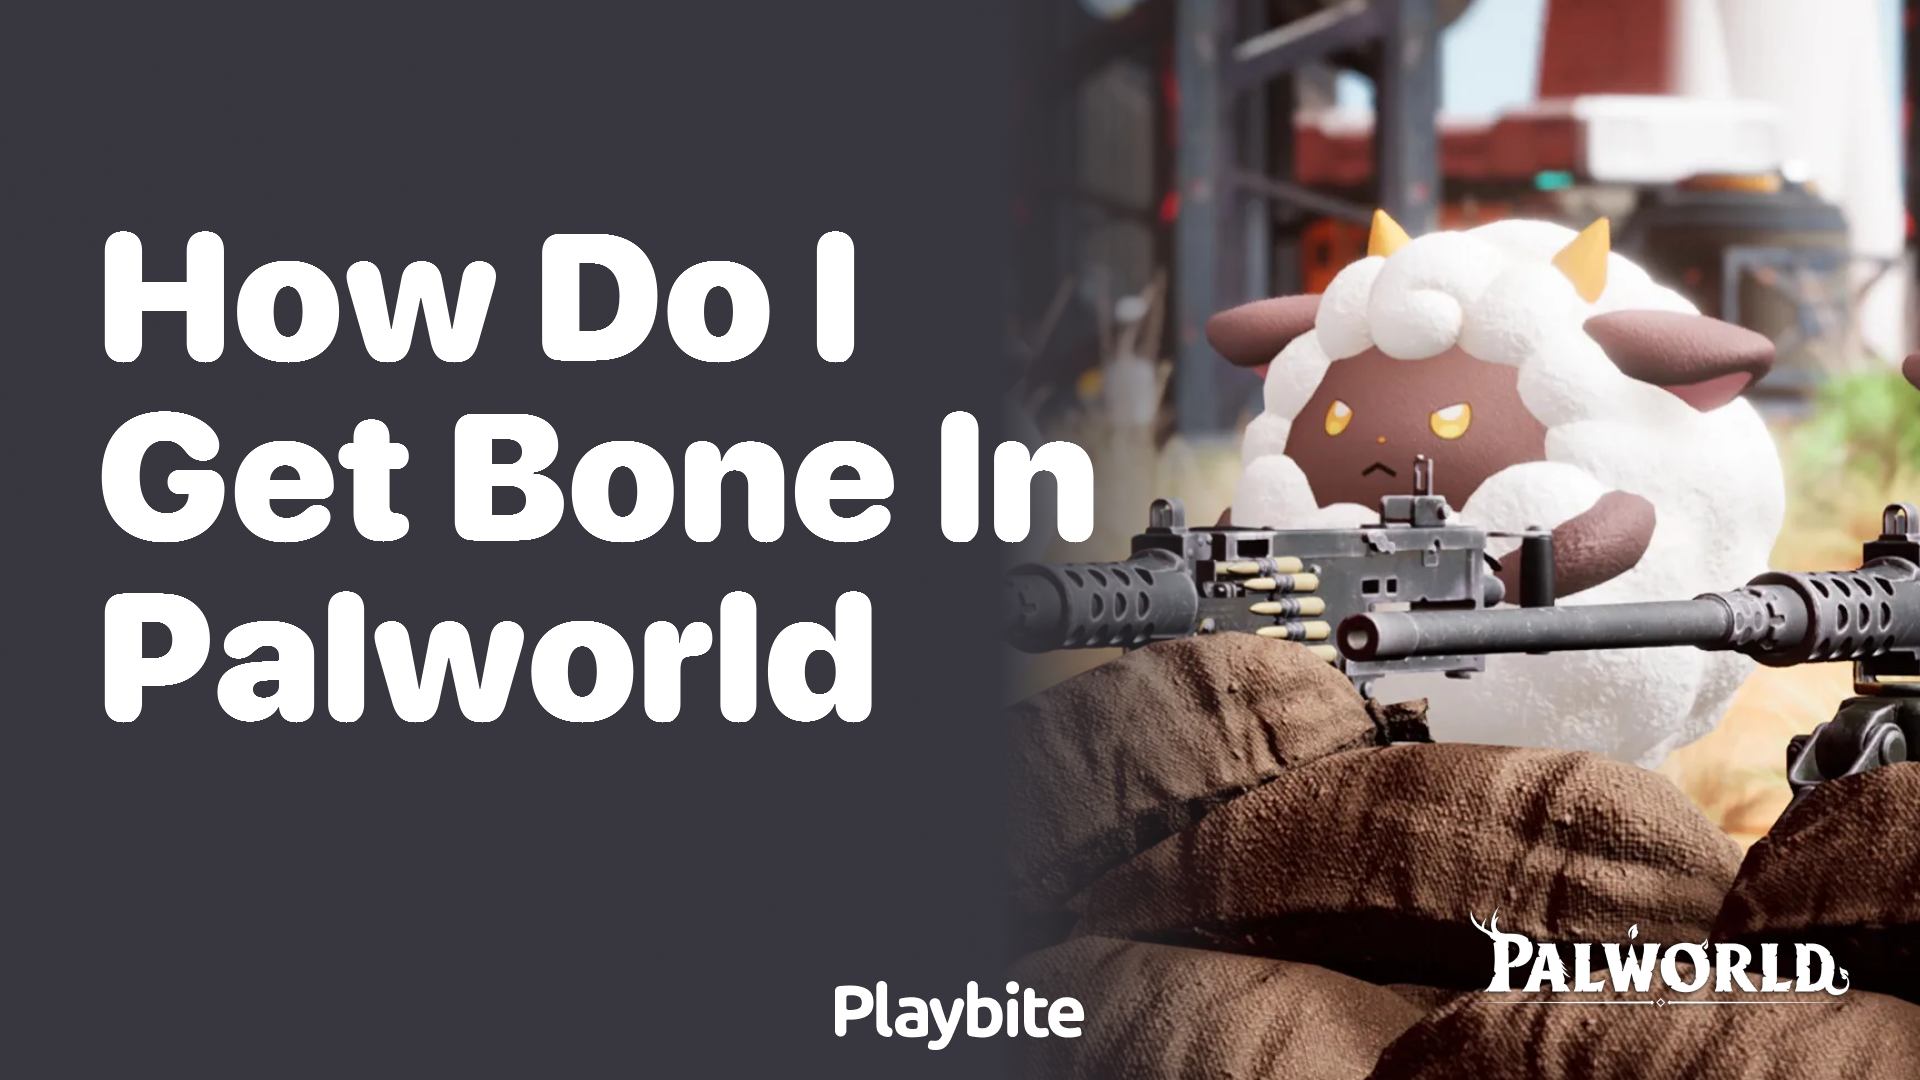 How do I get bone in Palworld?